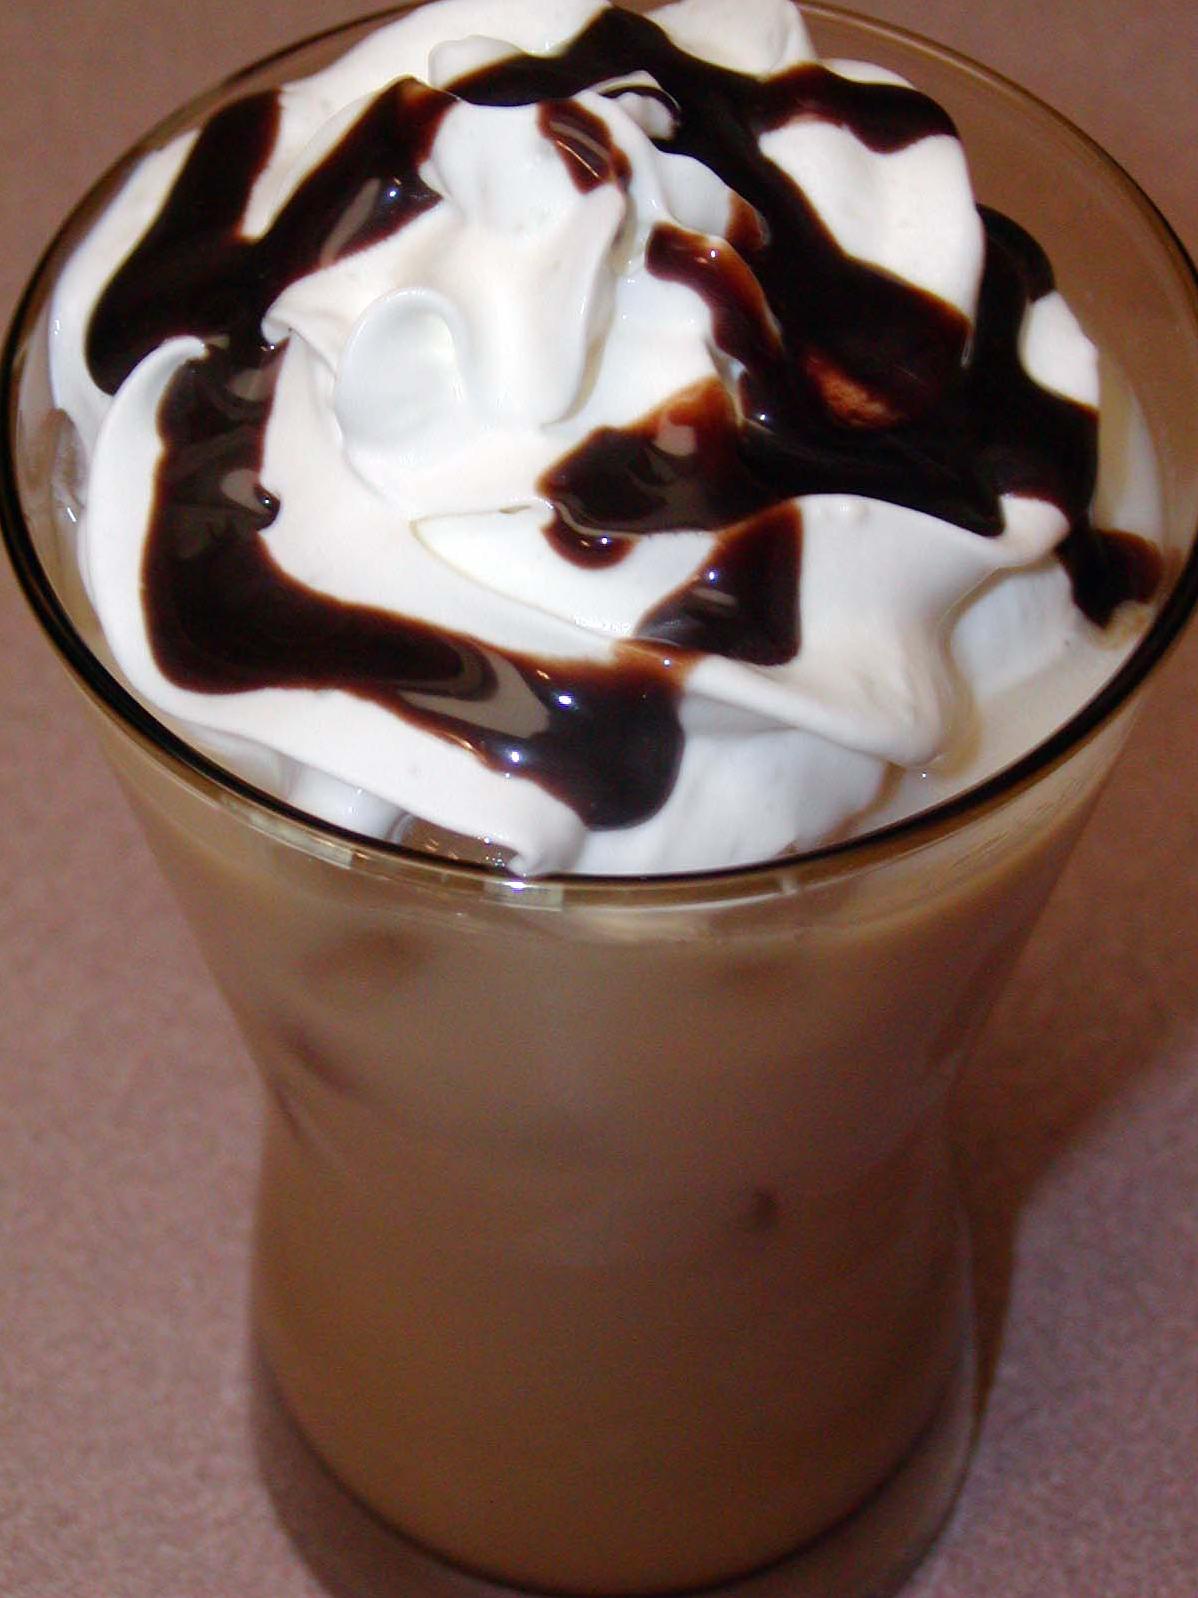  A delicious and creamy treat for coffee lovers.